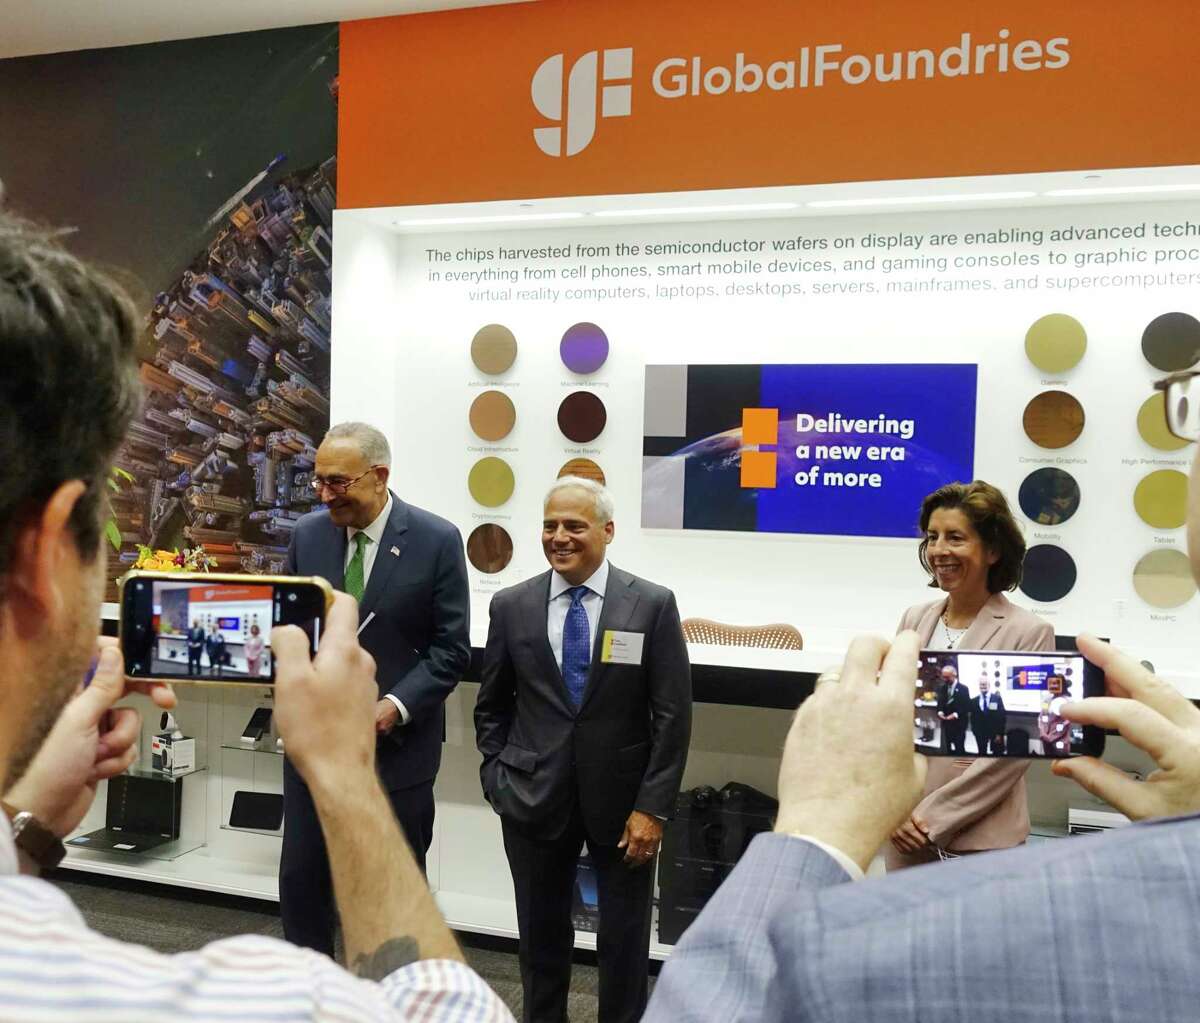 Senate Majority Leader Charles Schumer, left, Globalfoundries CEO Tom Caulfield, center, and U.S. Commerce Secretary Gina Raimondo, poses for photos at Globalfoundries on Monday, July 19, 2021, in Malta, N.Y. Caulfield announced at the Monday event that a second chip plant will be built in Malta. (Paul Buckowski/Times Union)